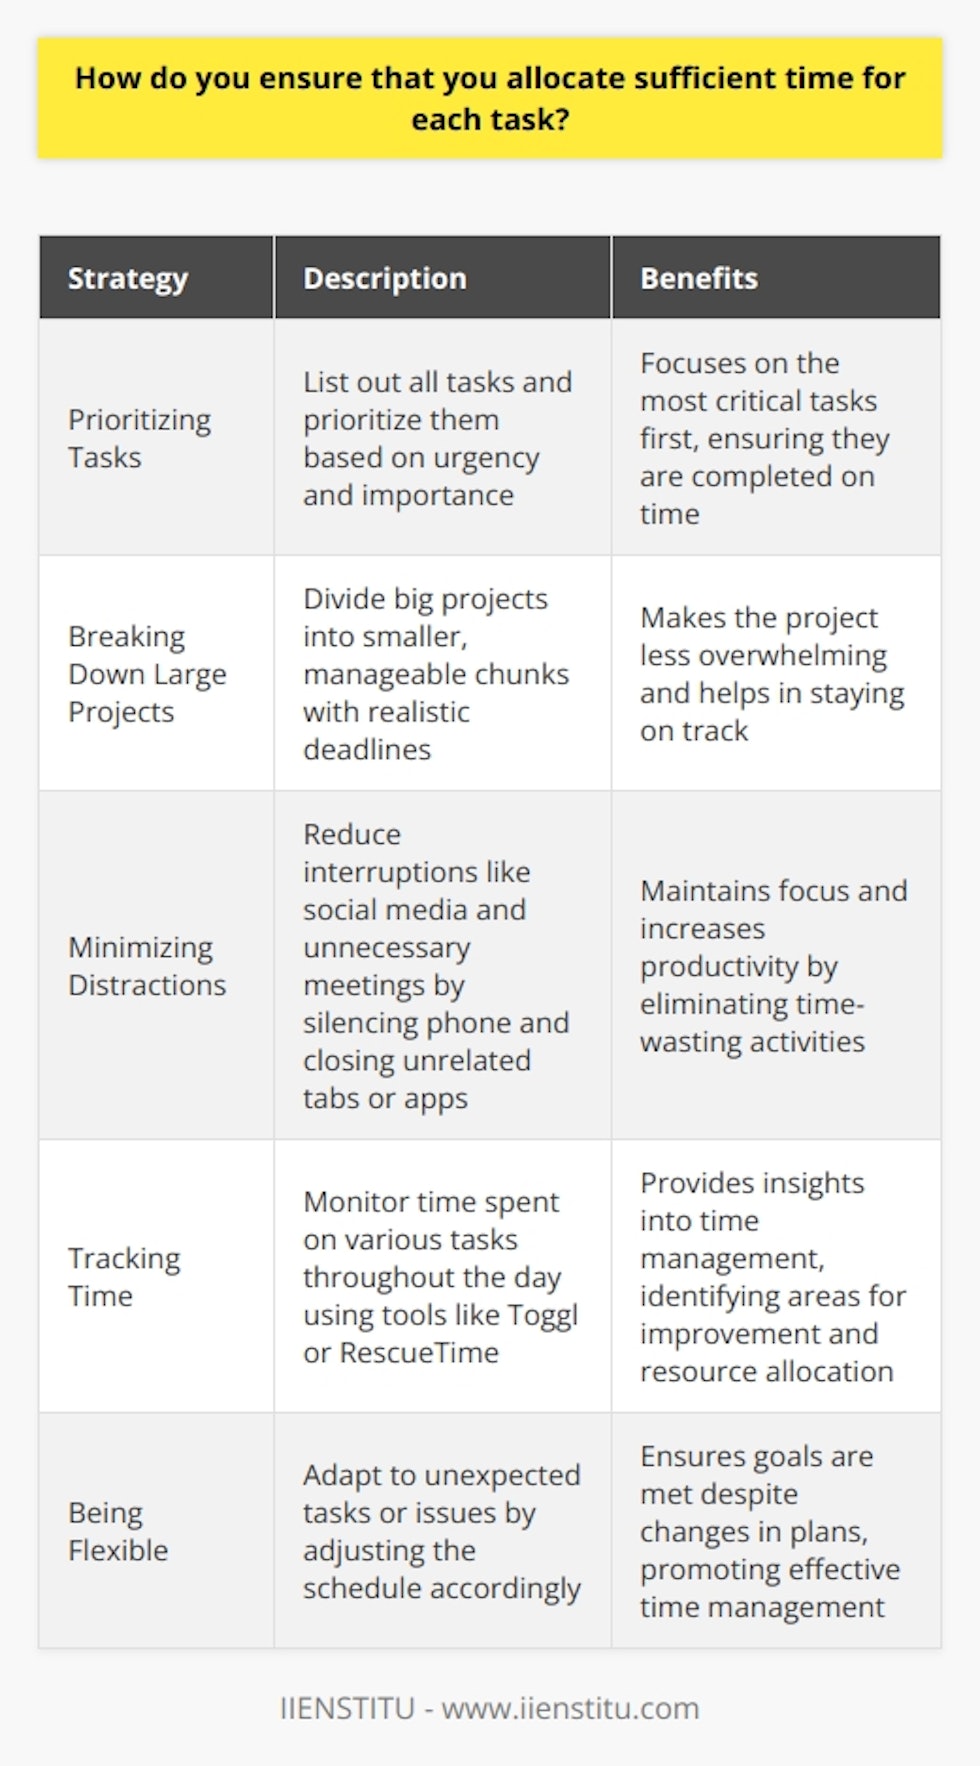 Prioritizing Tasks I always start my day by listing out all the tasks I need to complete. Then, I prioritize them based on urgency and importance. This helps me focus on the most critical tasks first. Breaking Down Large Projects When Im working on a big project, I break it down into smaller, manageable chunks. This allows me to allocate sufficient time for each part without feeling overwhelmed. I set realistic deadlines for myself to stay on track. Minimizing Distractions To ensure Im using my time efficiently, I minimize distractions like social media and unnecessary meetings. Ill put my phone on silent and close any tabs or apps that arent related to the task at hand. This keeps me focused and productive. Tracking My Time I like to track how Im spending my time throughout the day. This gives me a better understanding of where I might be wasting time or where I need to allocate more resources. Tools like Toggl or RescueTime can be really helpful for this. Being Flexible While its important to have a plan, I also try to be flexible. Sometimes unexpected tasks or issues come up, and I need to adjust my schedule accordingly. Being adaptable helps me manage my time more effectively and ensures Im still meeting my goals. At the end of the day, its all about finding a system that works for you. Through trial and error, Ive learned what strategies help me allocate my time wisely and get things done efficiently. Its an ongoing process, but one thats crucial for success in any role.